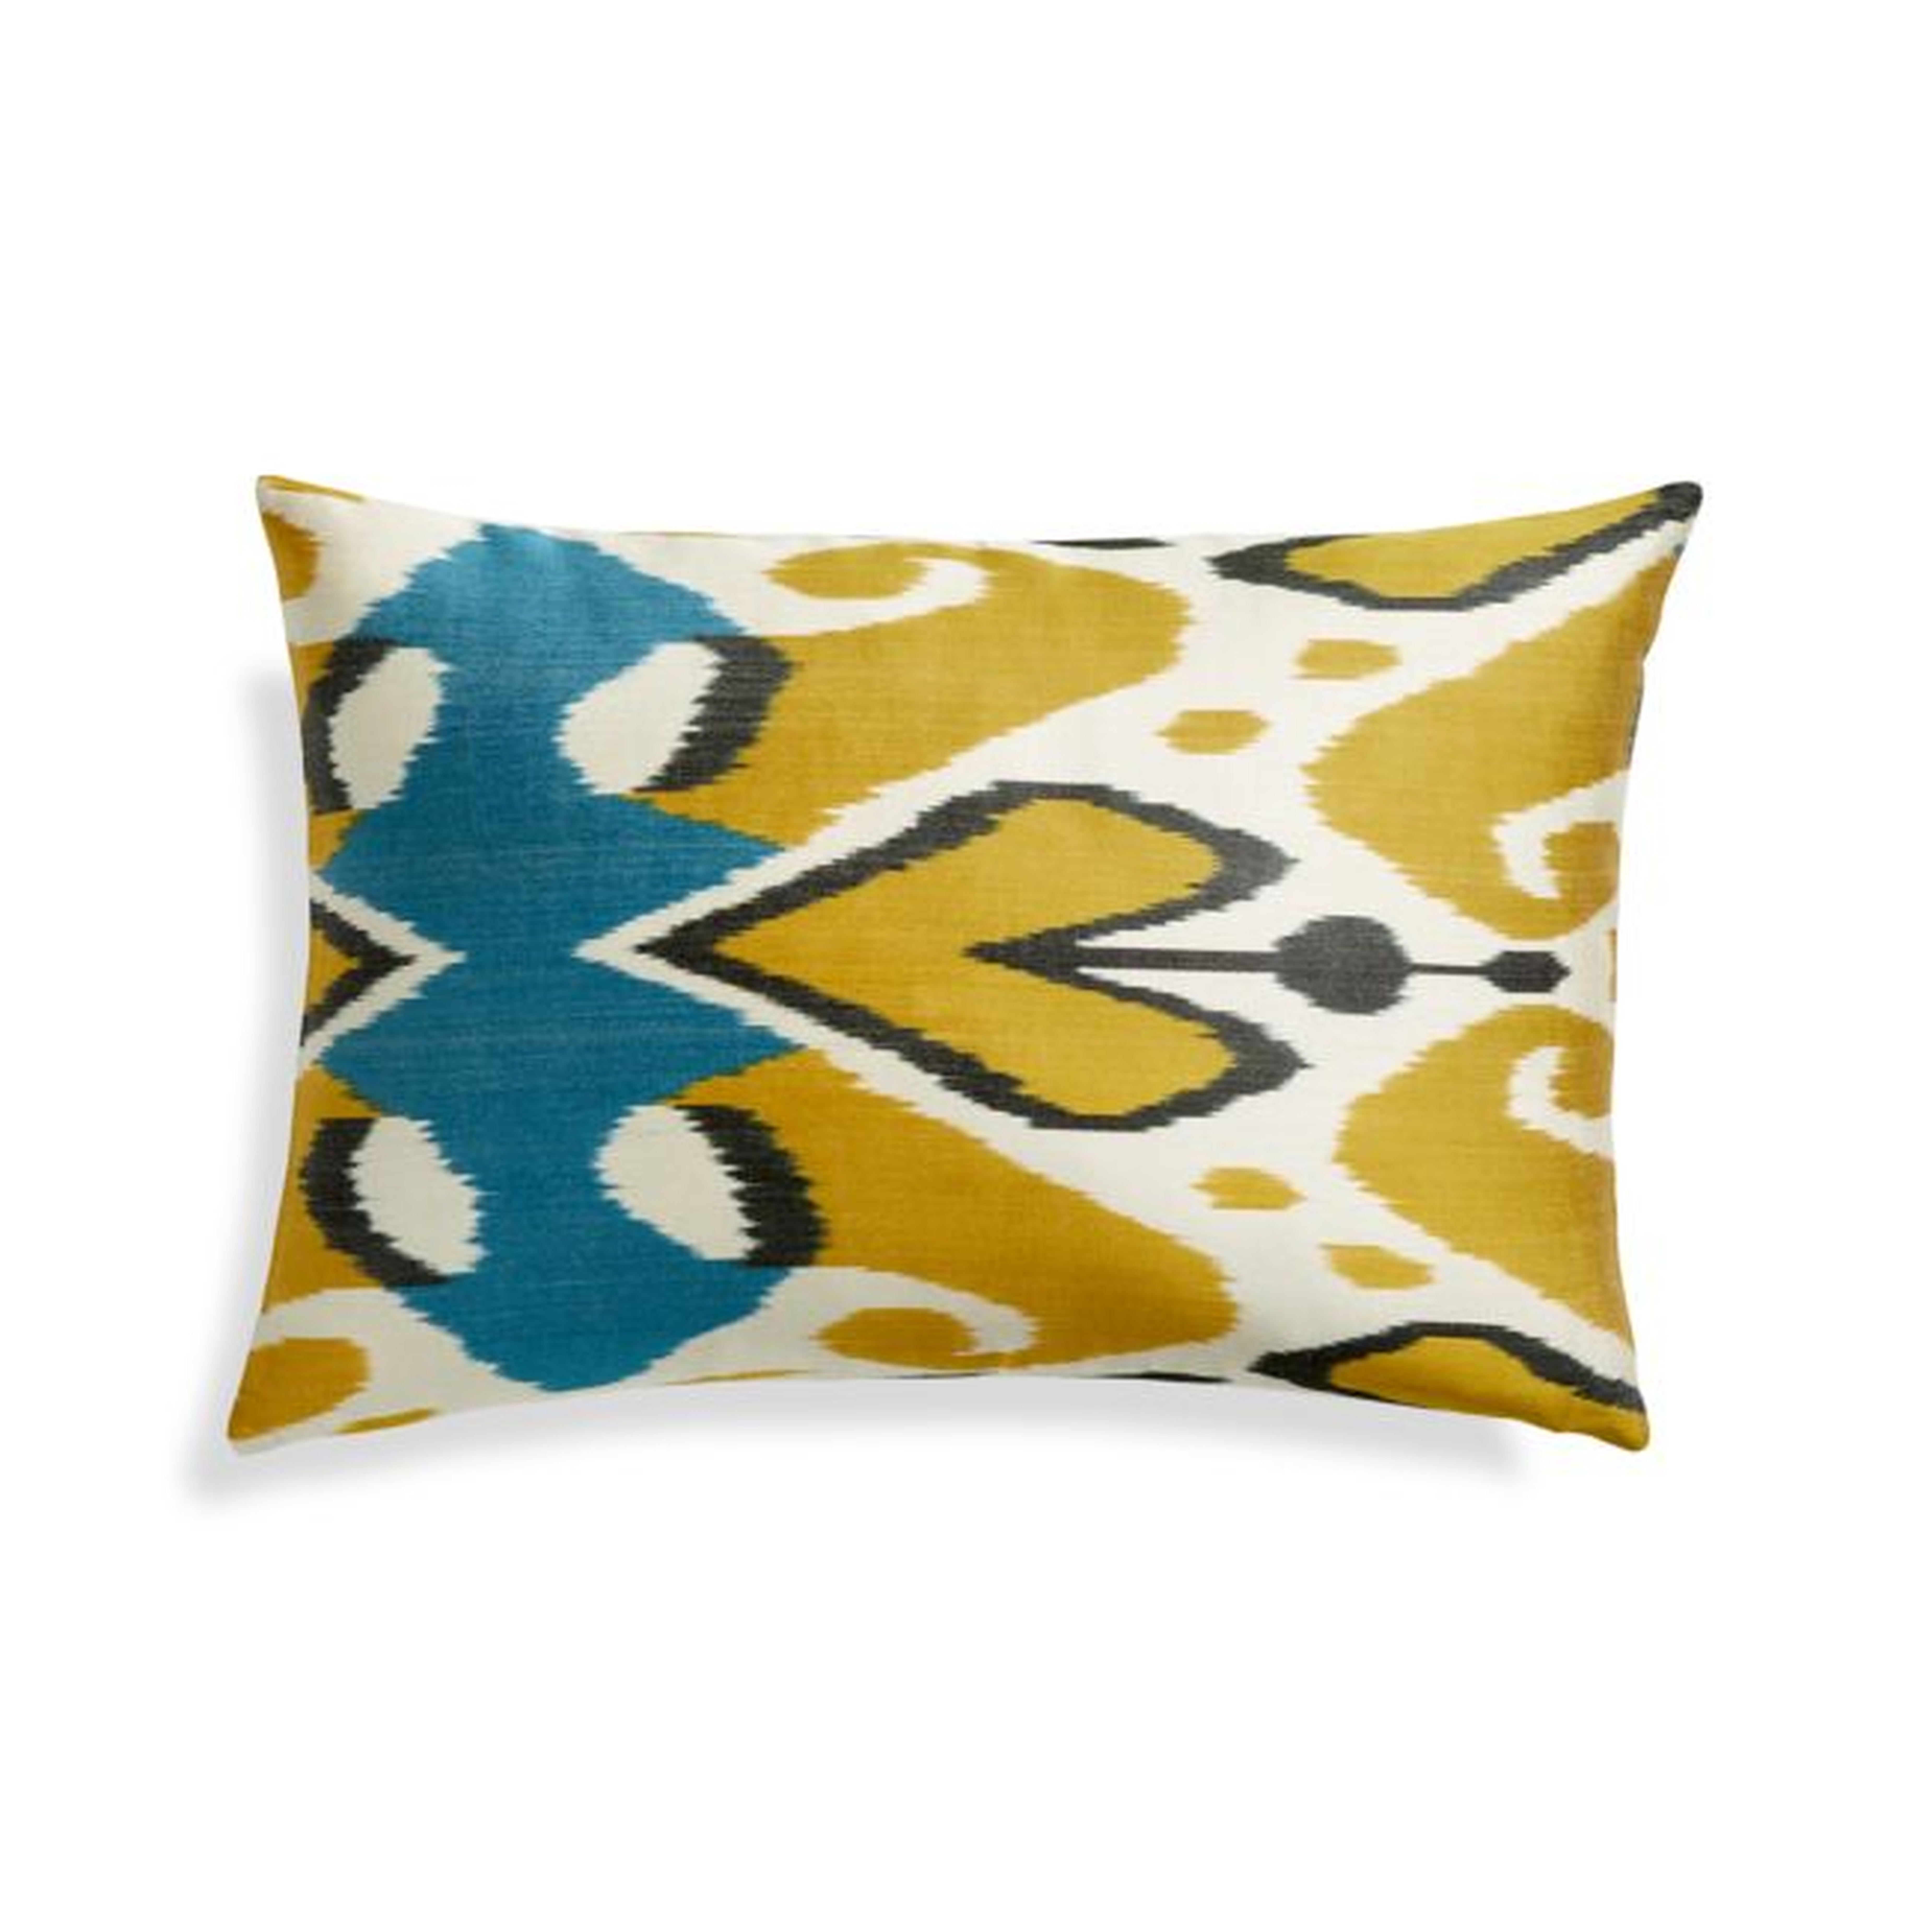 Silk Ikat Pillow Cover Yellow/Blue 22"x15" - Crate and Barrel